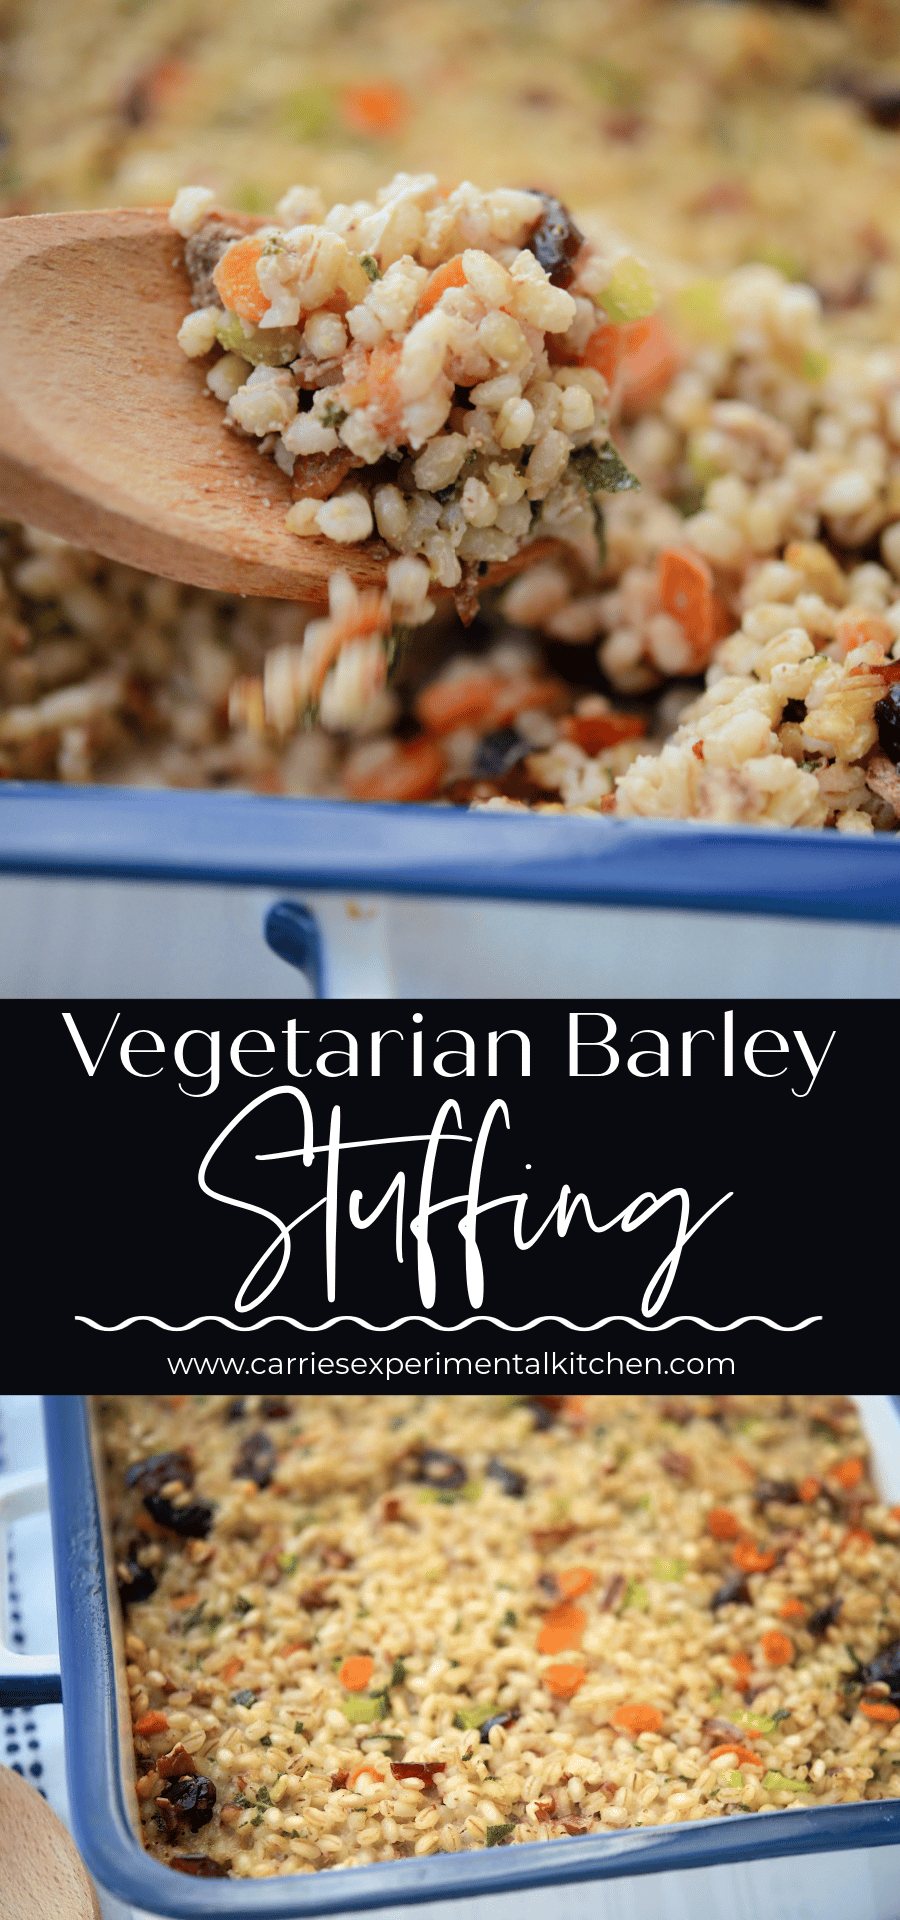 Vegetarian Barley Stuffing with Cranberries and Pecans